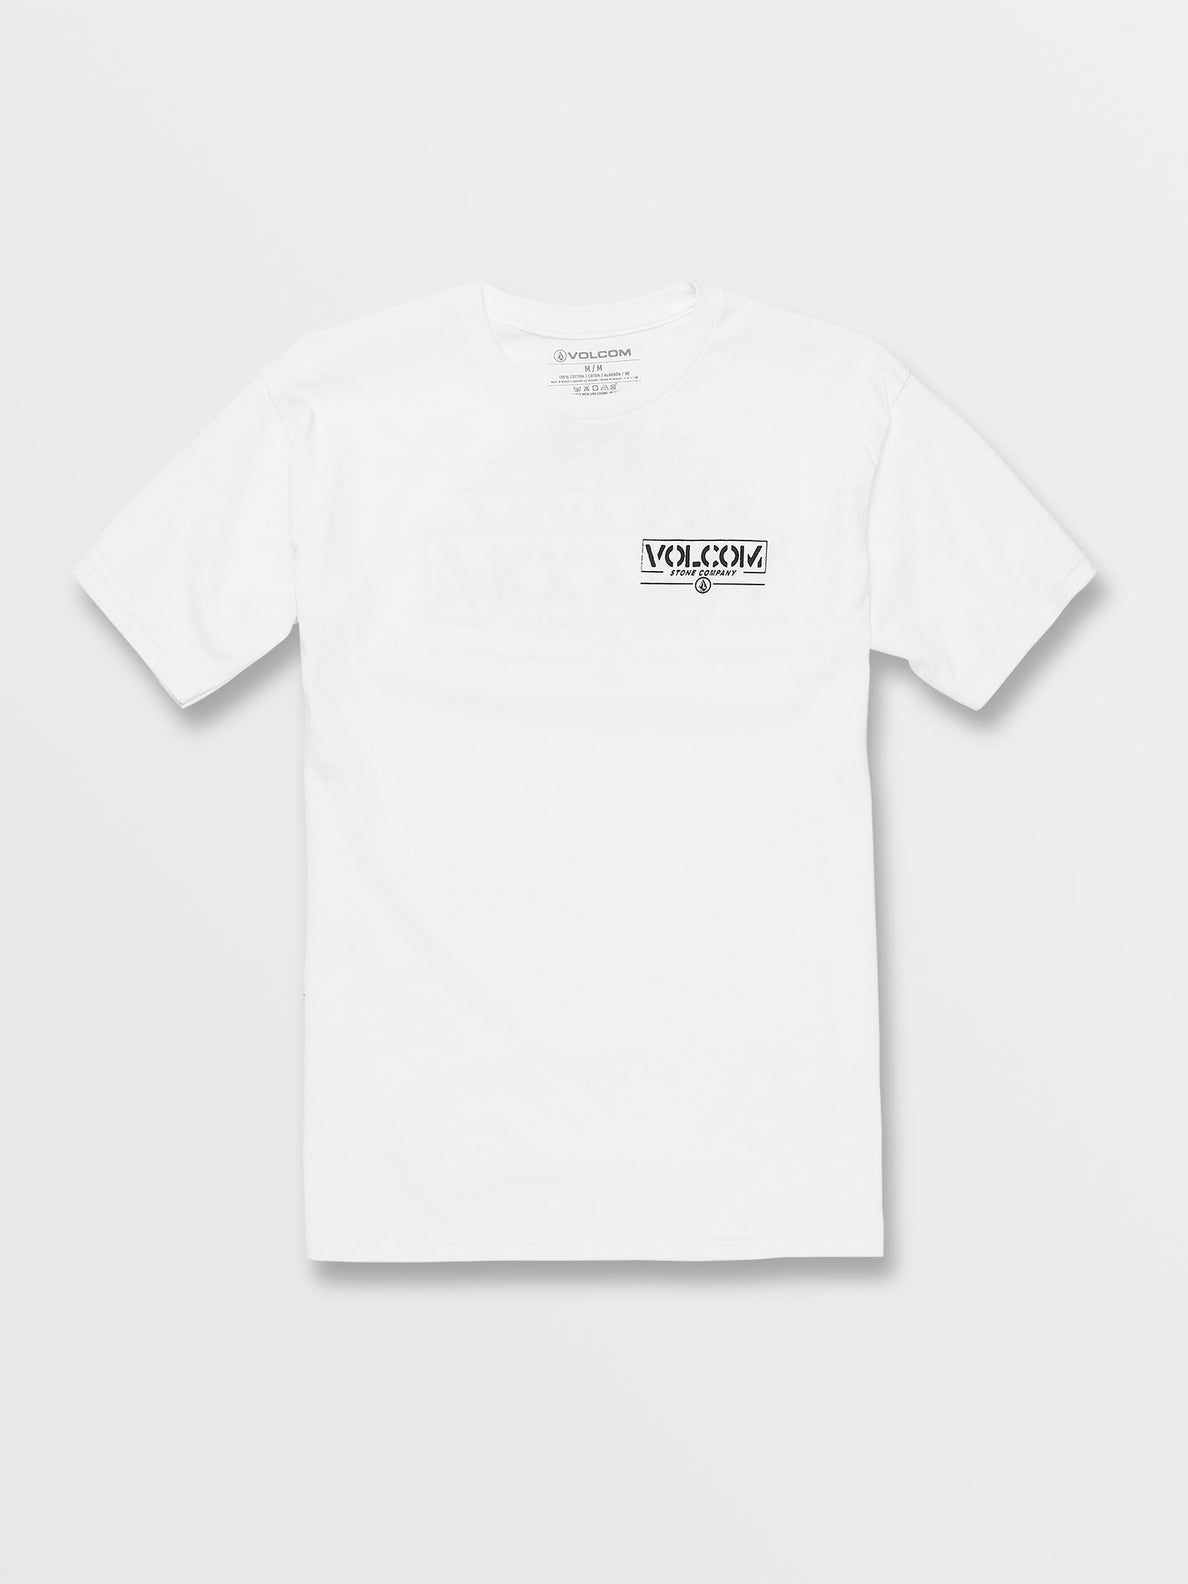 Repeater Short Sleeve Tee - White (A3542104_WHT) [F]